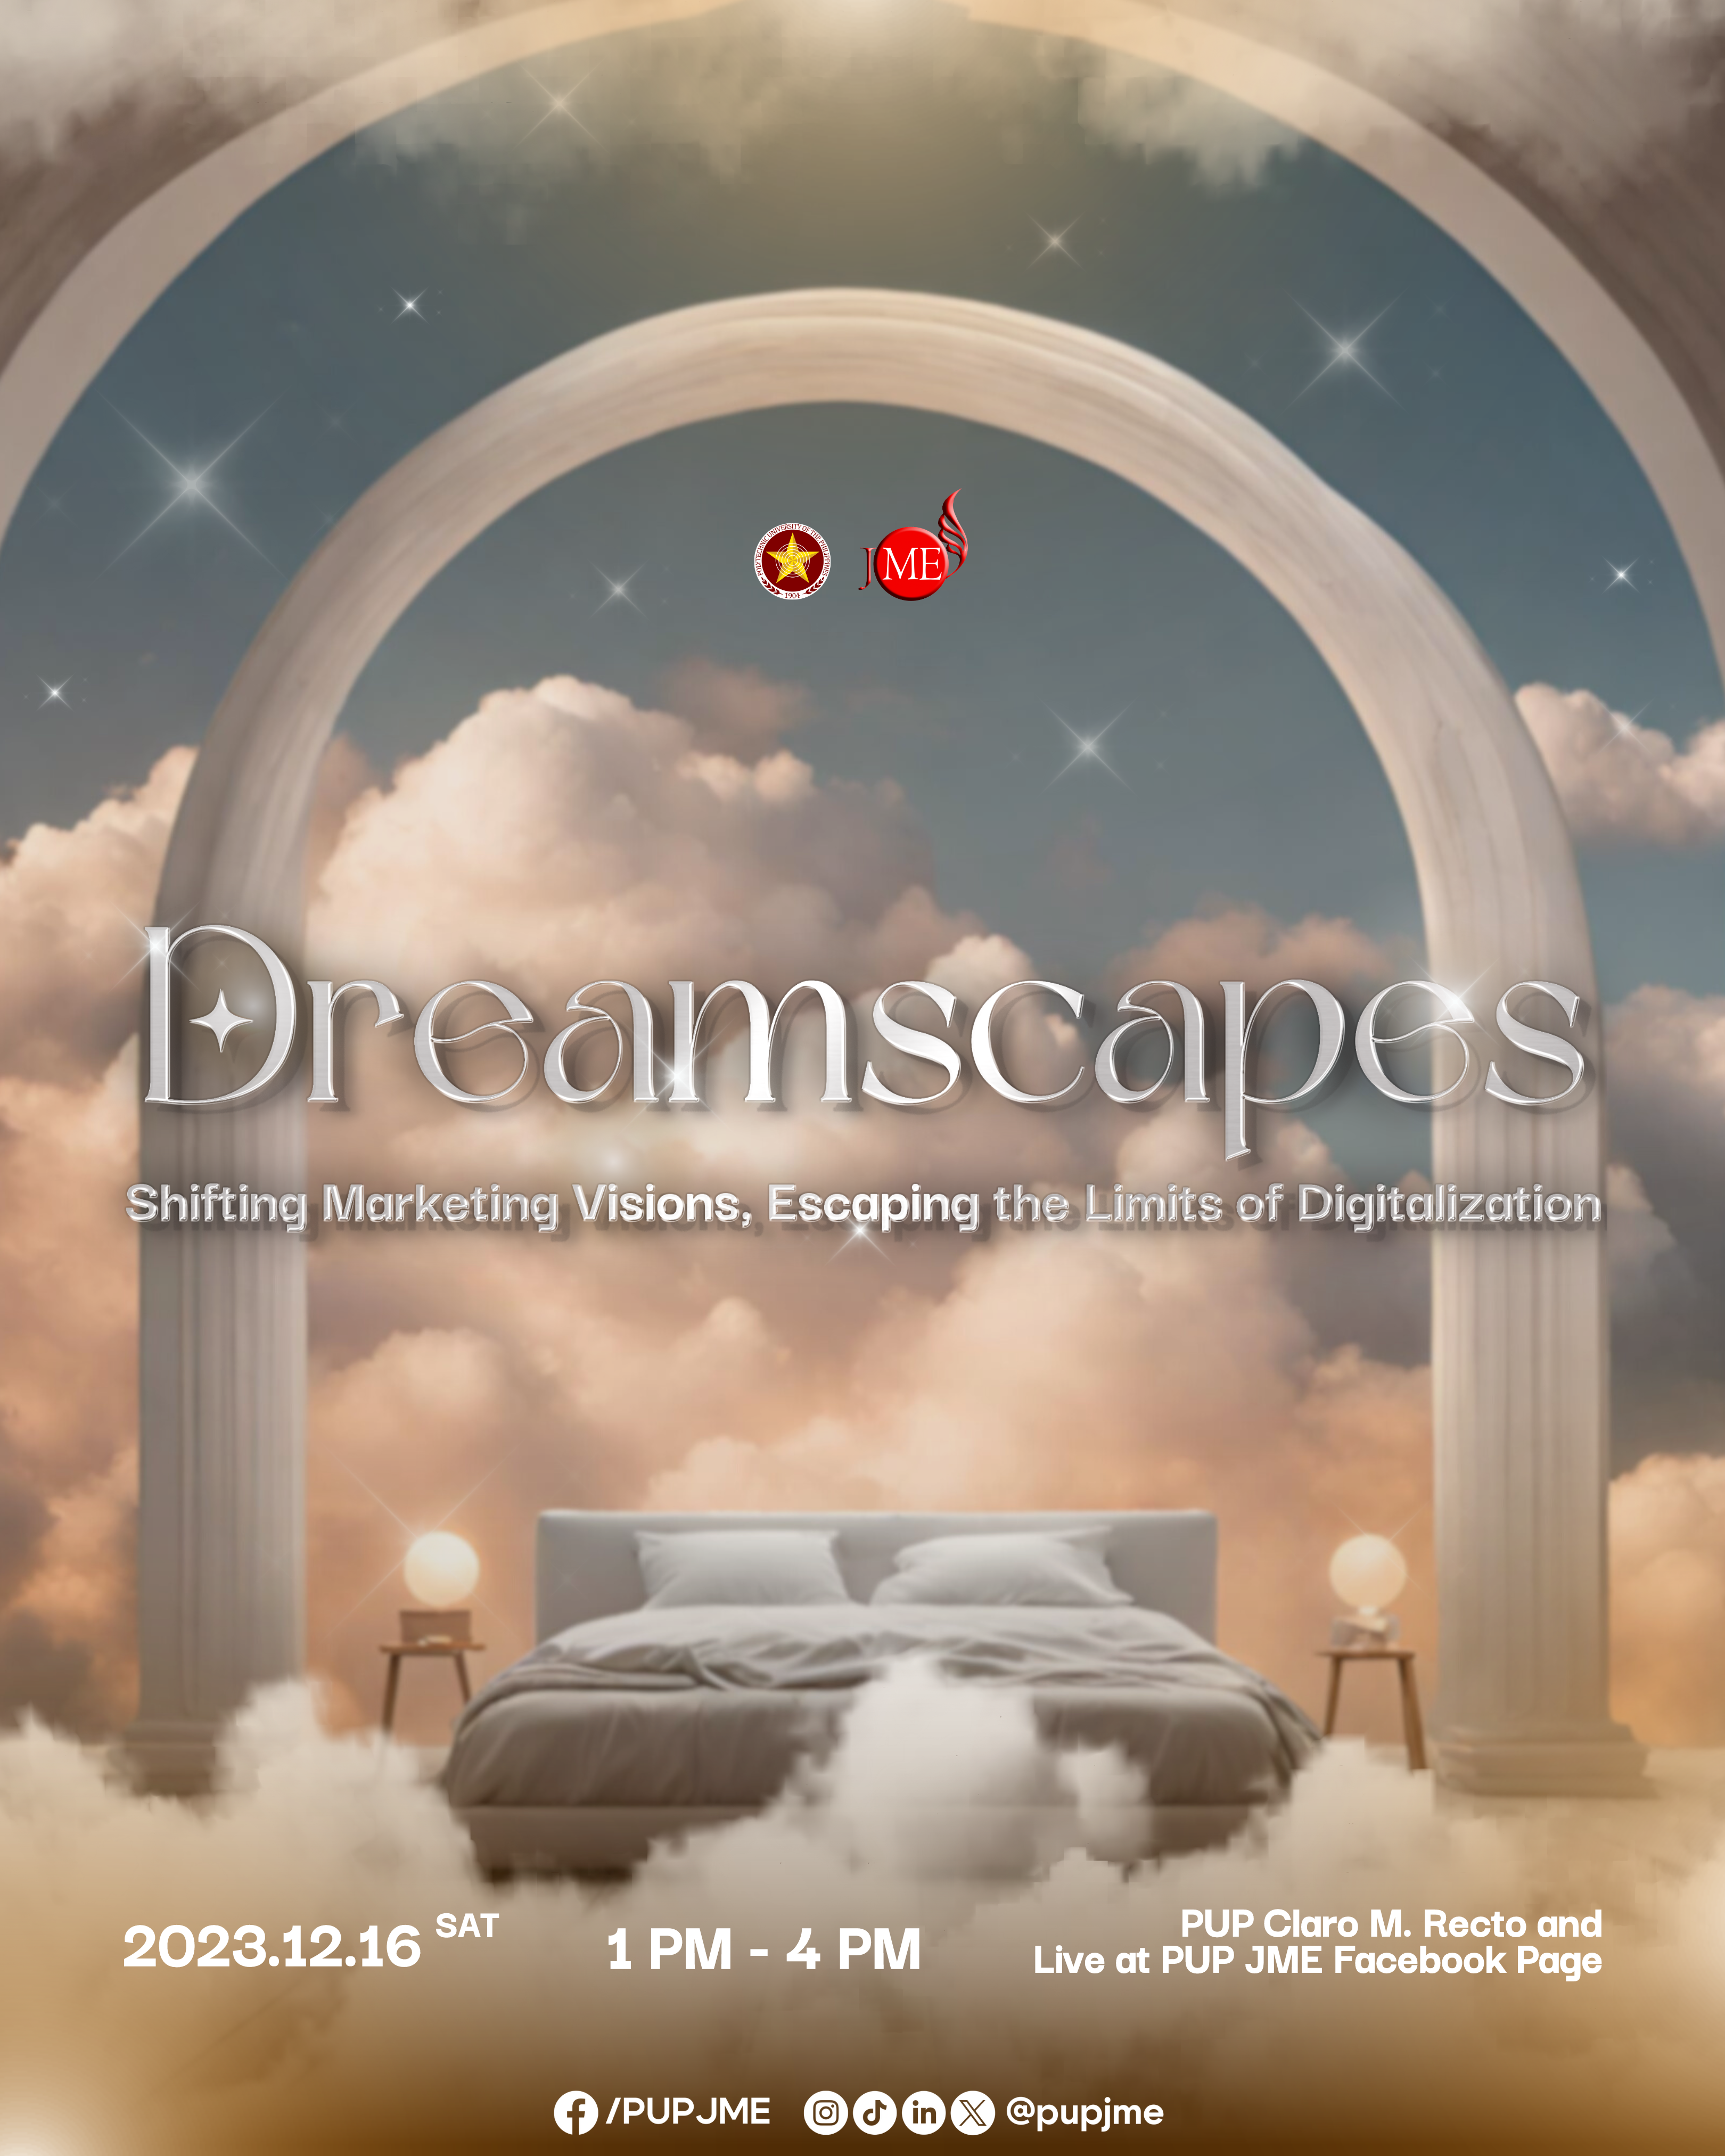 Dreamscapes: Shifting Marketing Visions, Escaping the Limits of Digitalization